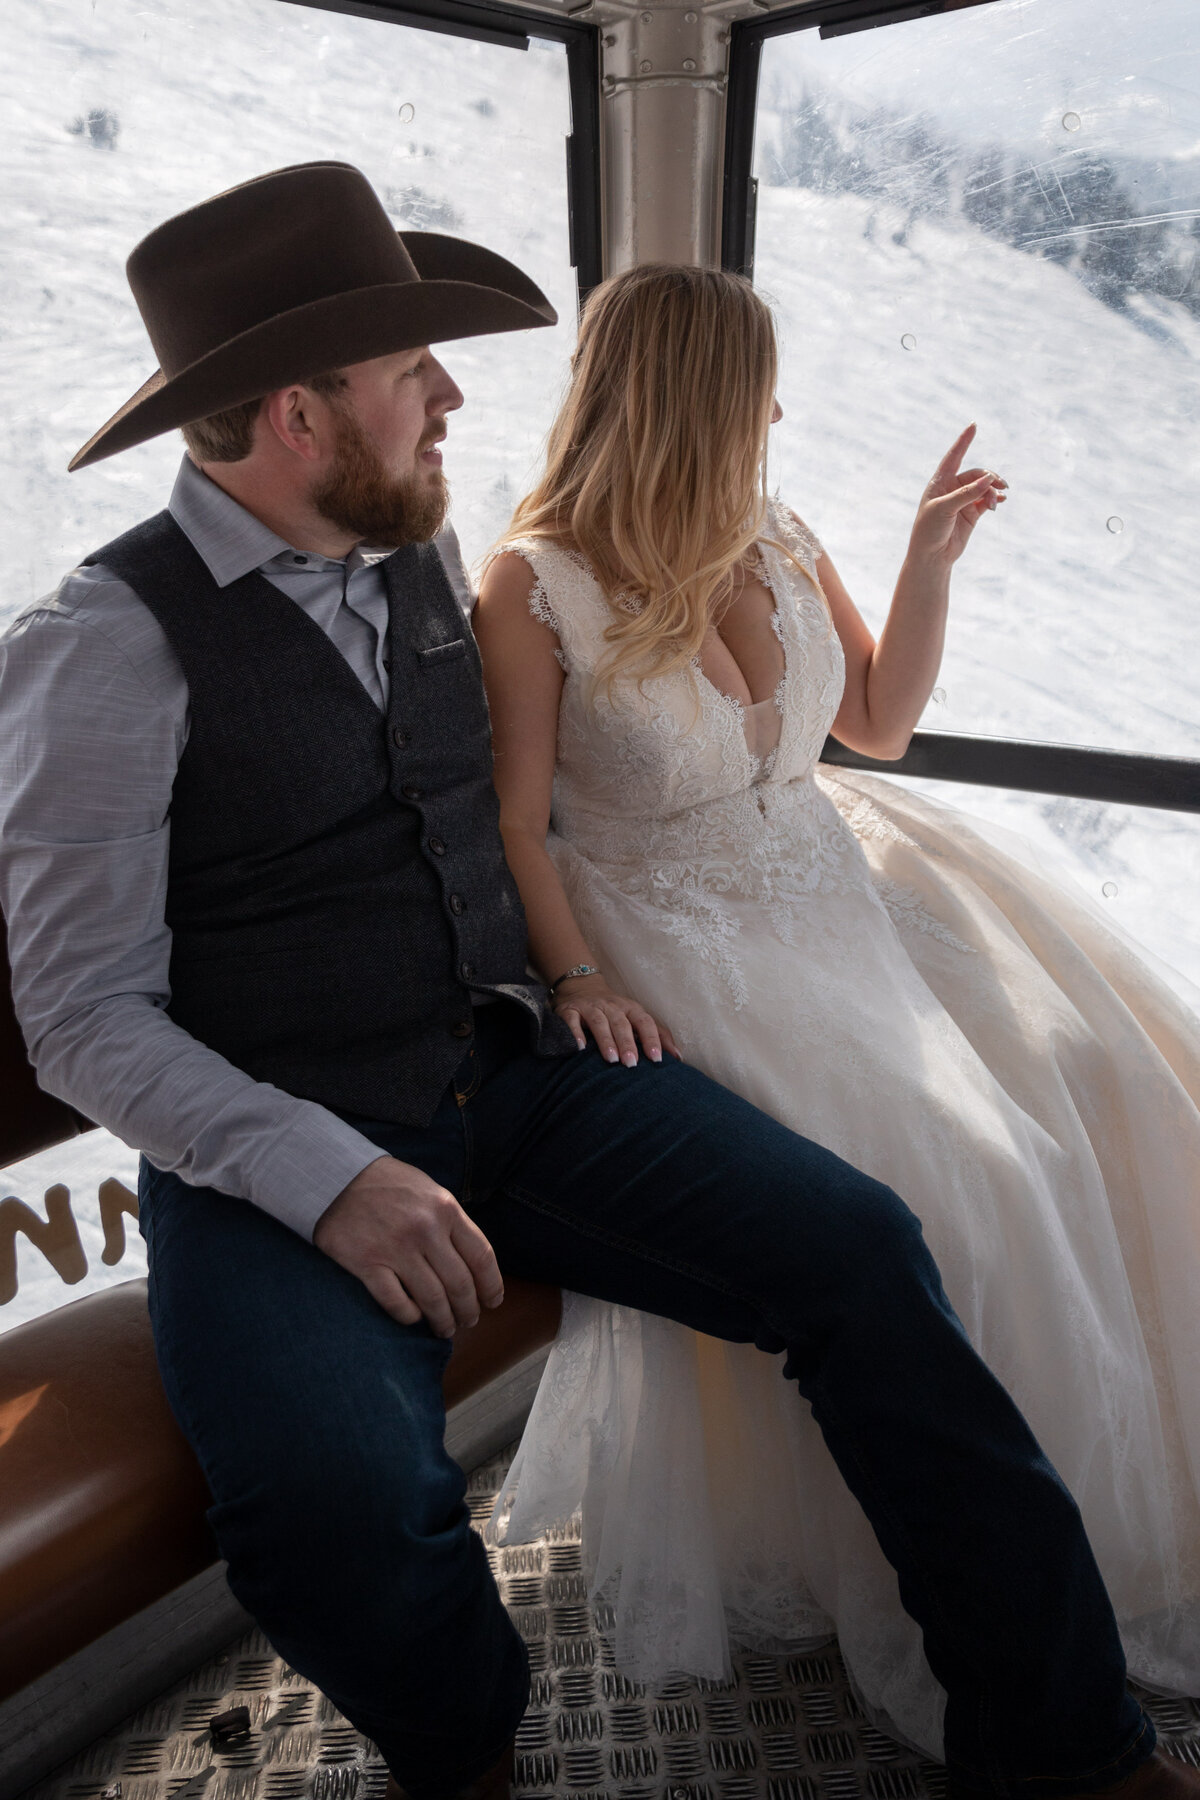 A bride and groom sit next to each other on a gondola traveling down a mountain while the bride points out the window.